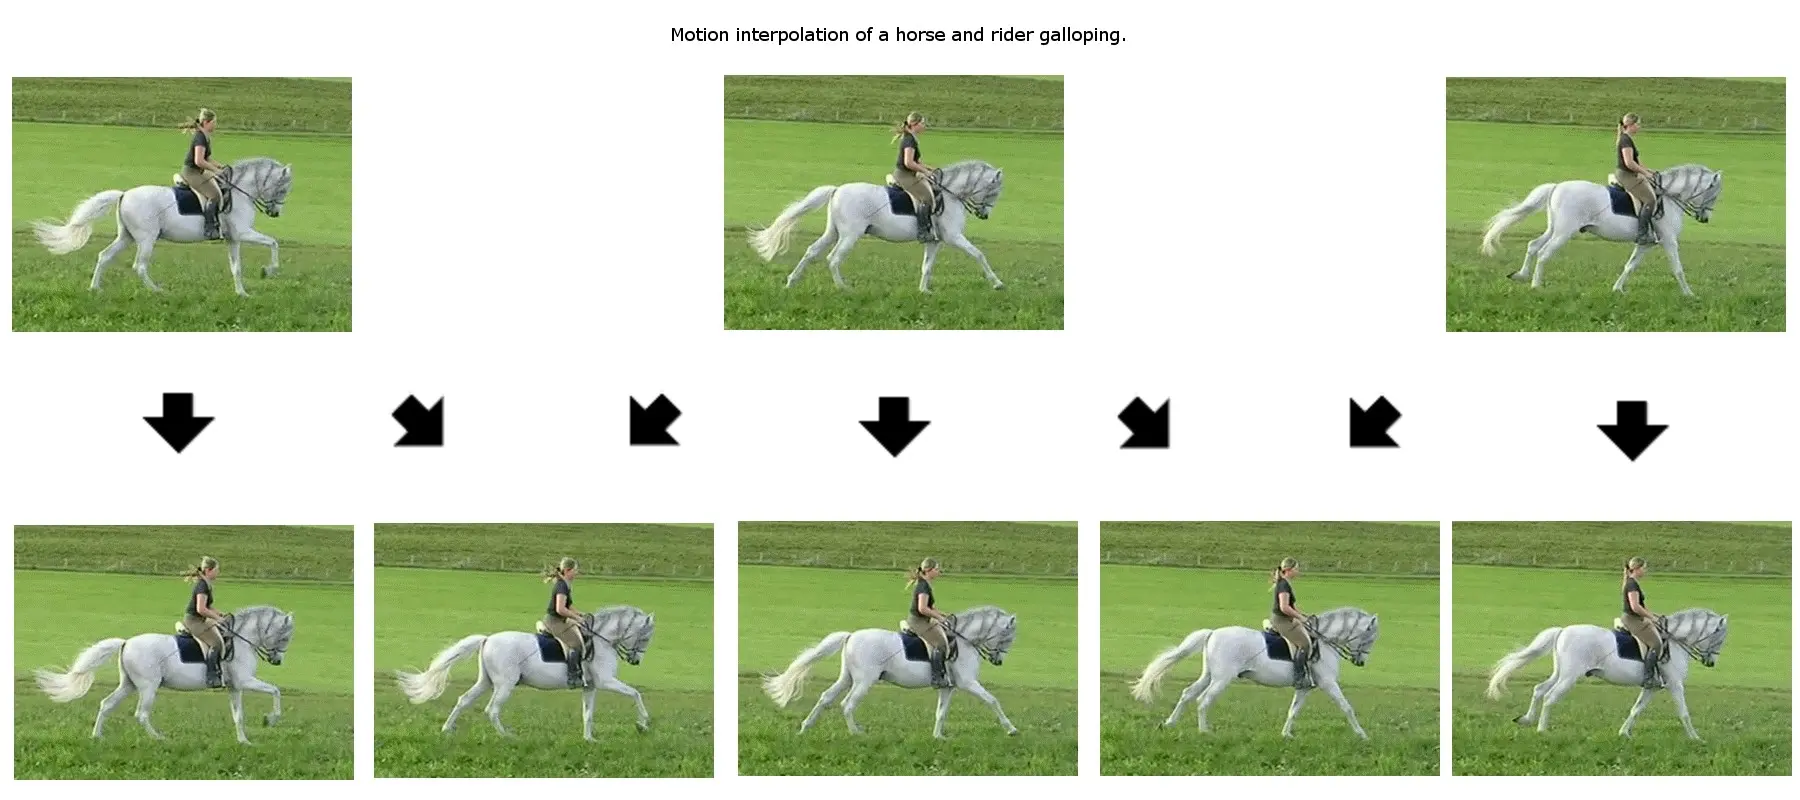 Motion estimation predicts horse’s movement between video frames